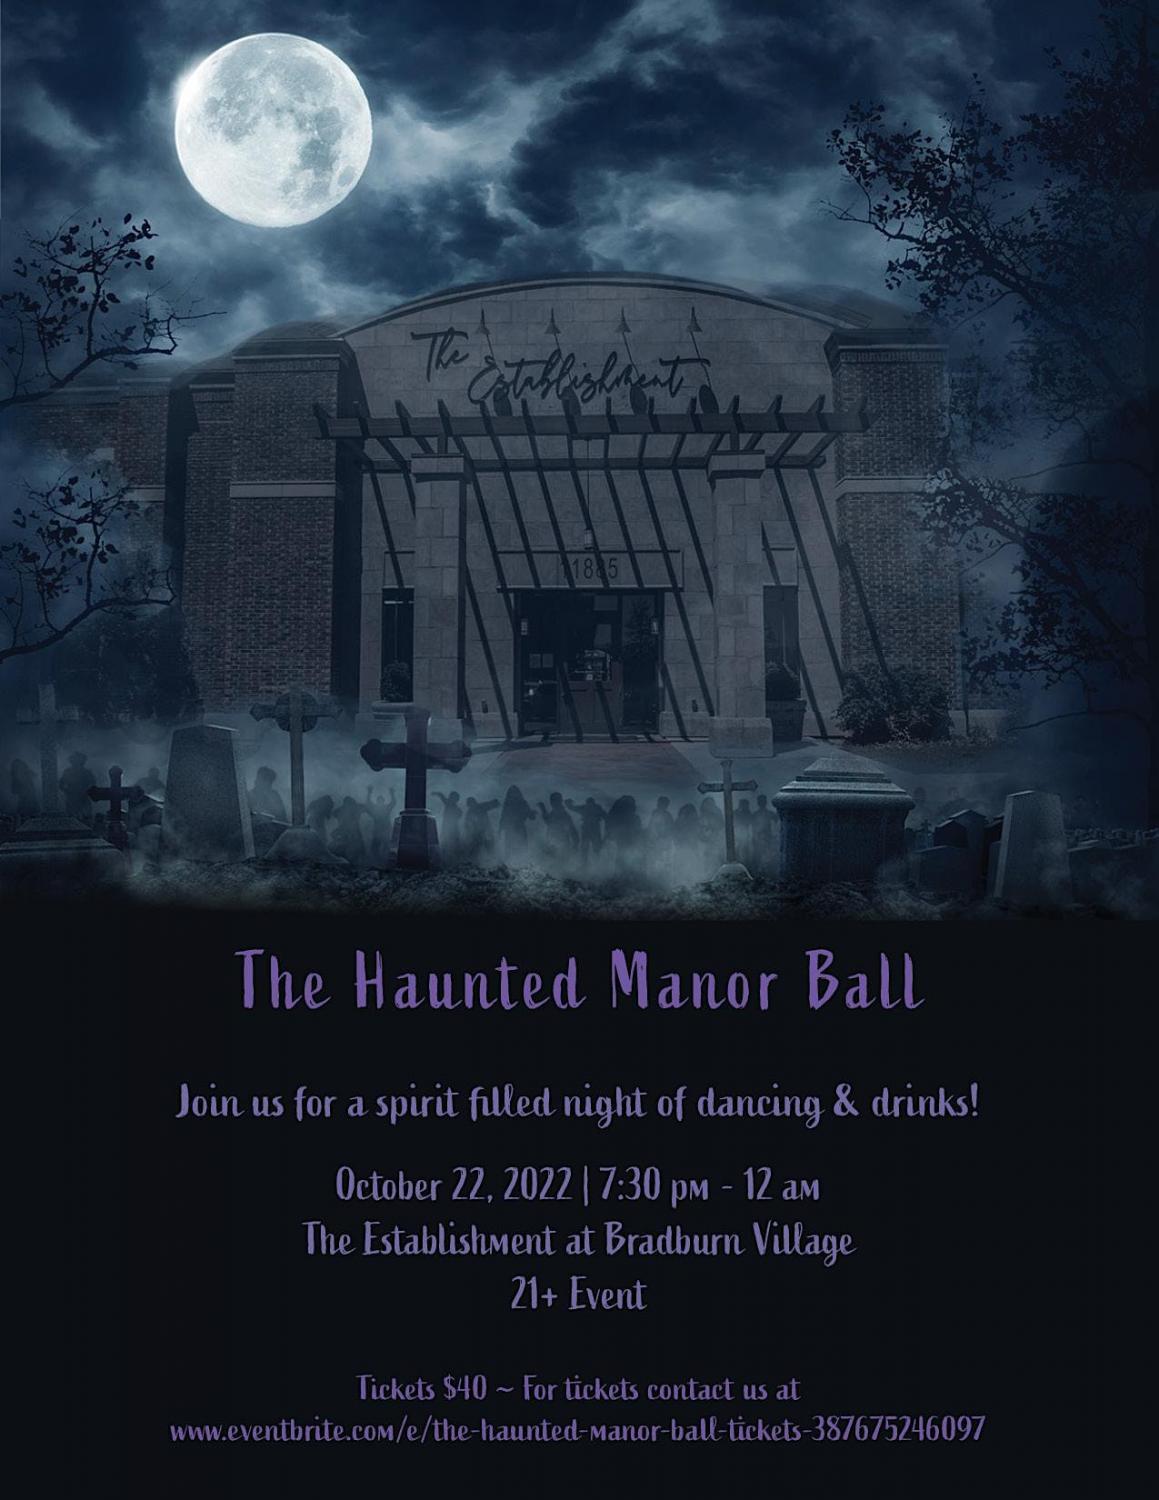 The Haunted Manor Ball
Sat Oct 22, 7:00 PM - Sun Oct 23, 7:00 PM
in 2 days